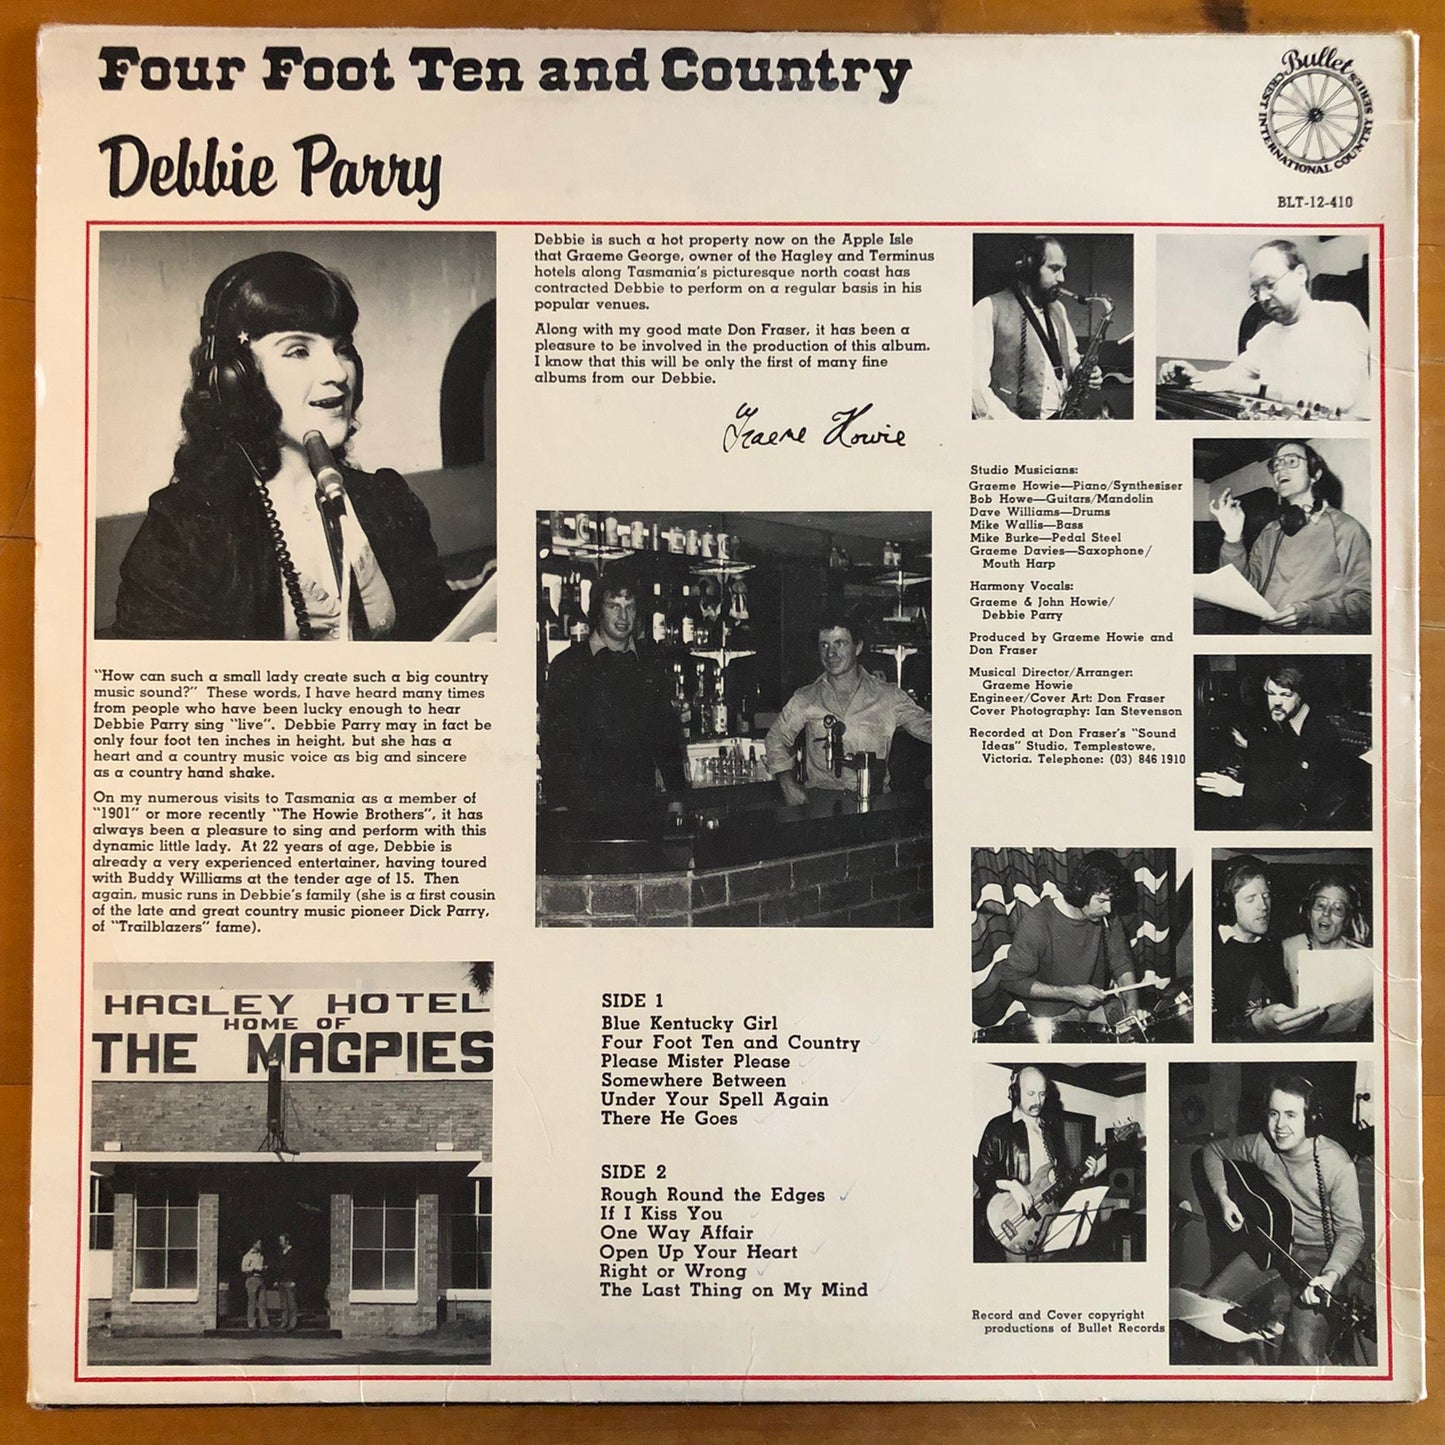 Debbie Parry - Four Foot Ten and Country